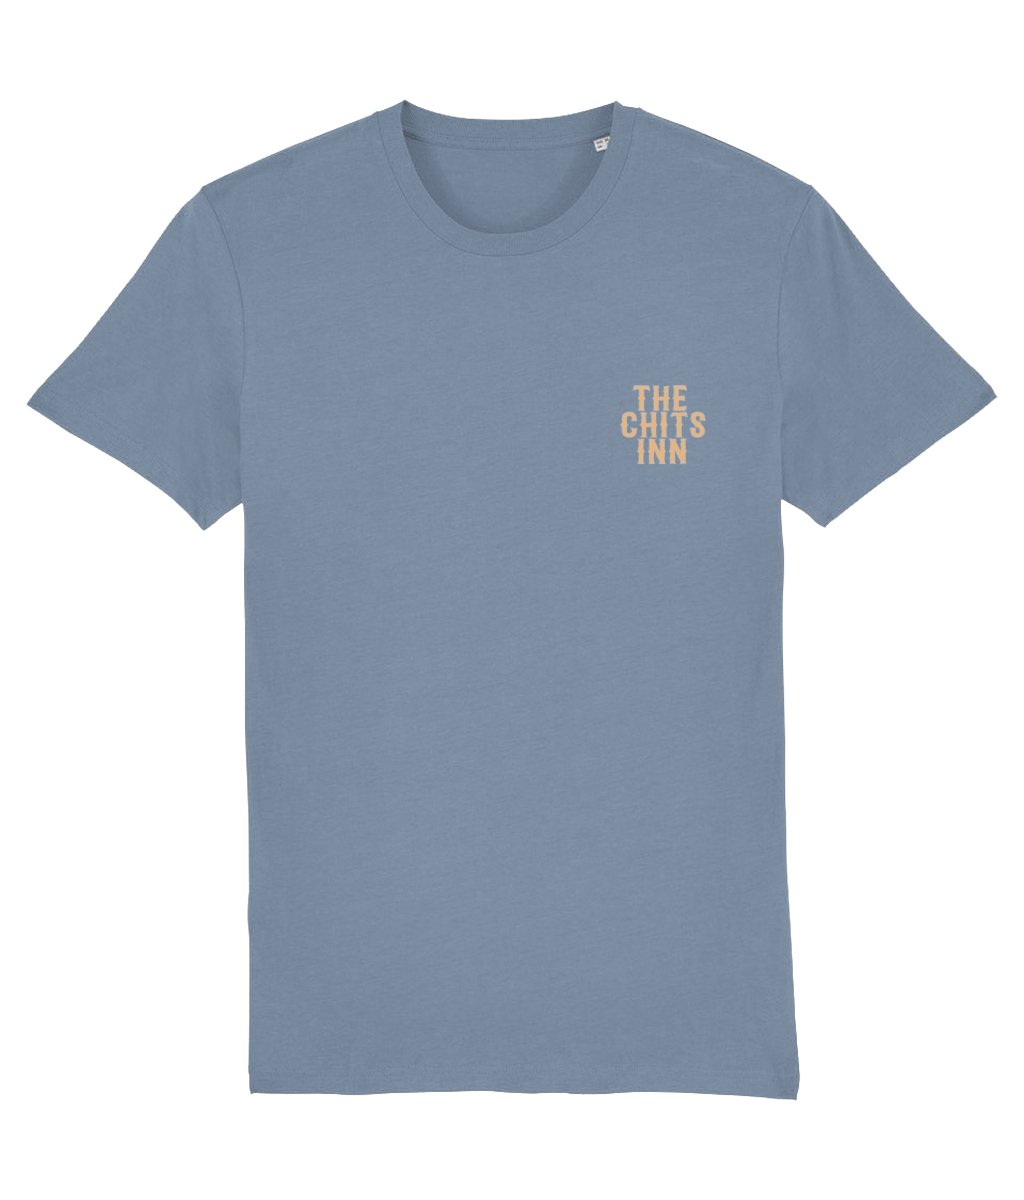 Three Sheets in the Wind Tee - The Chits Inn